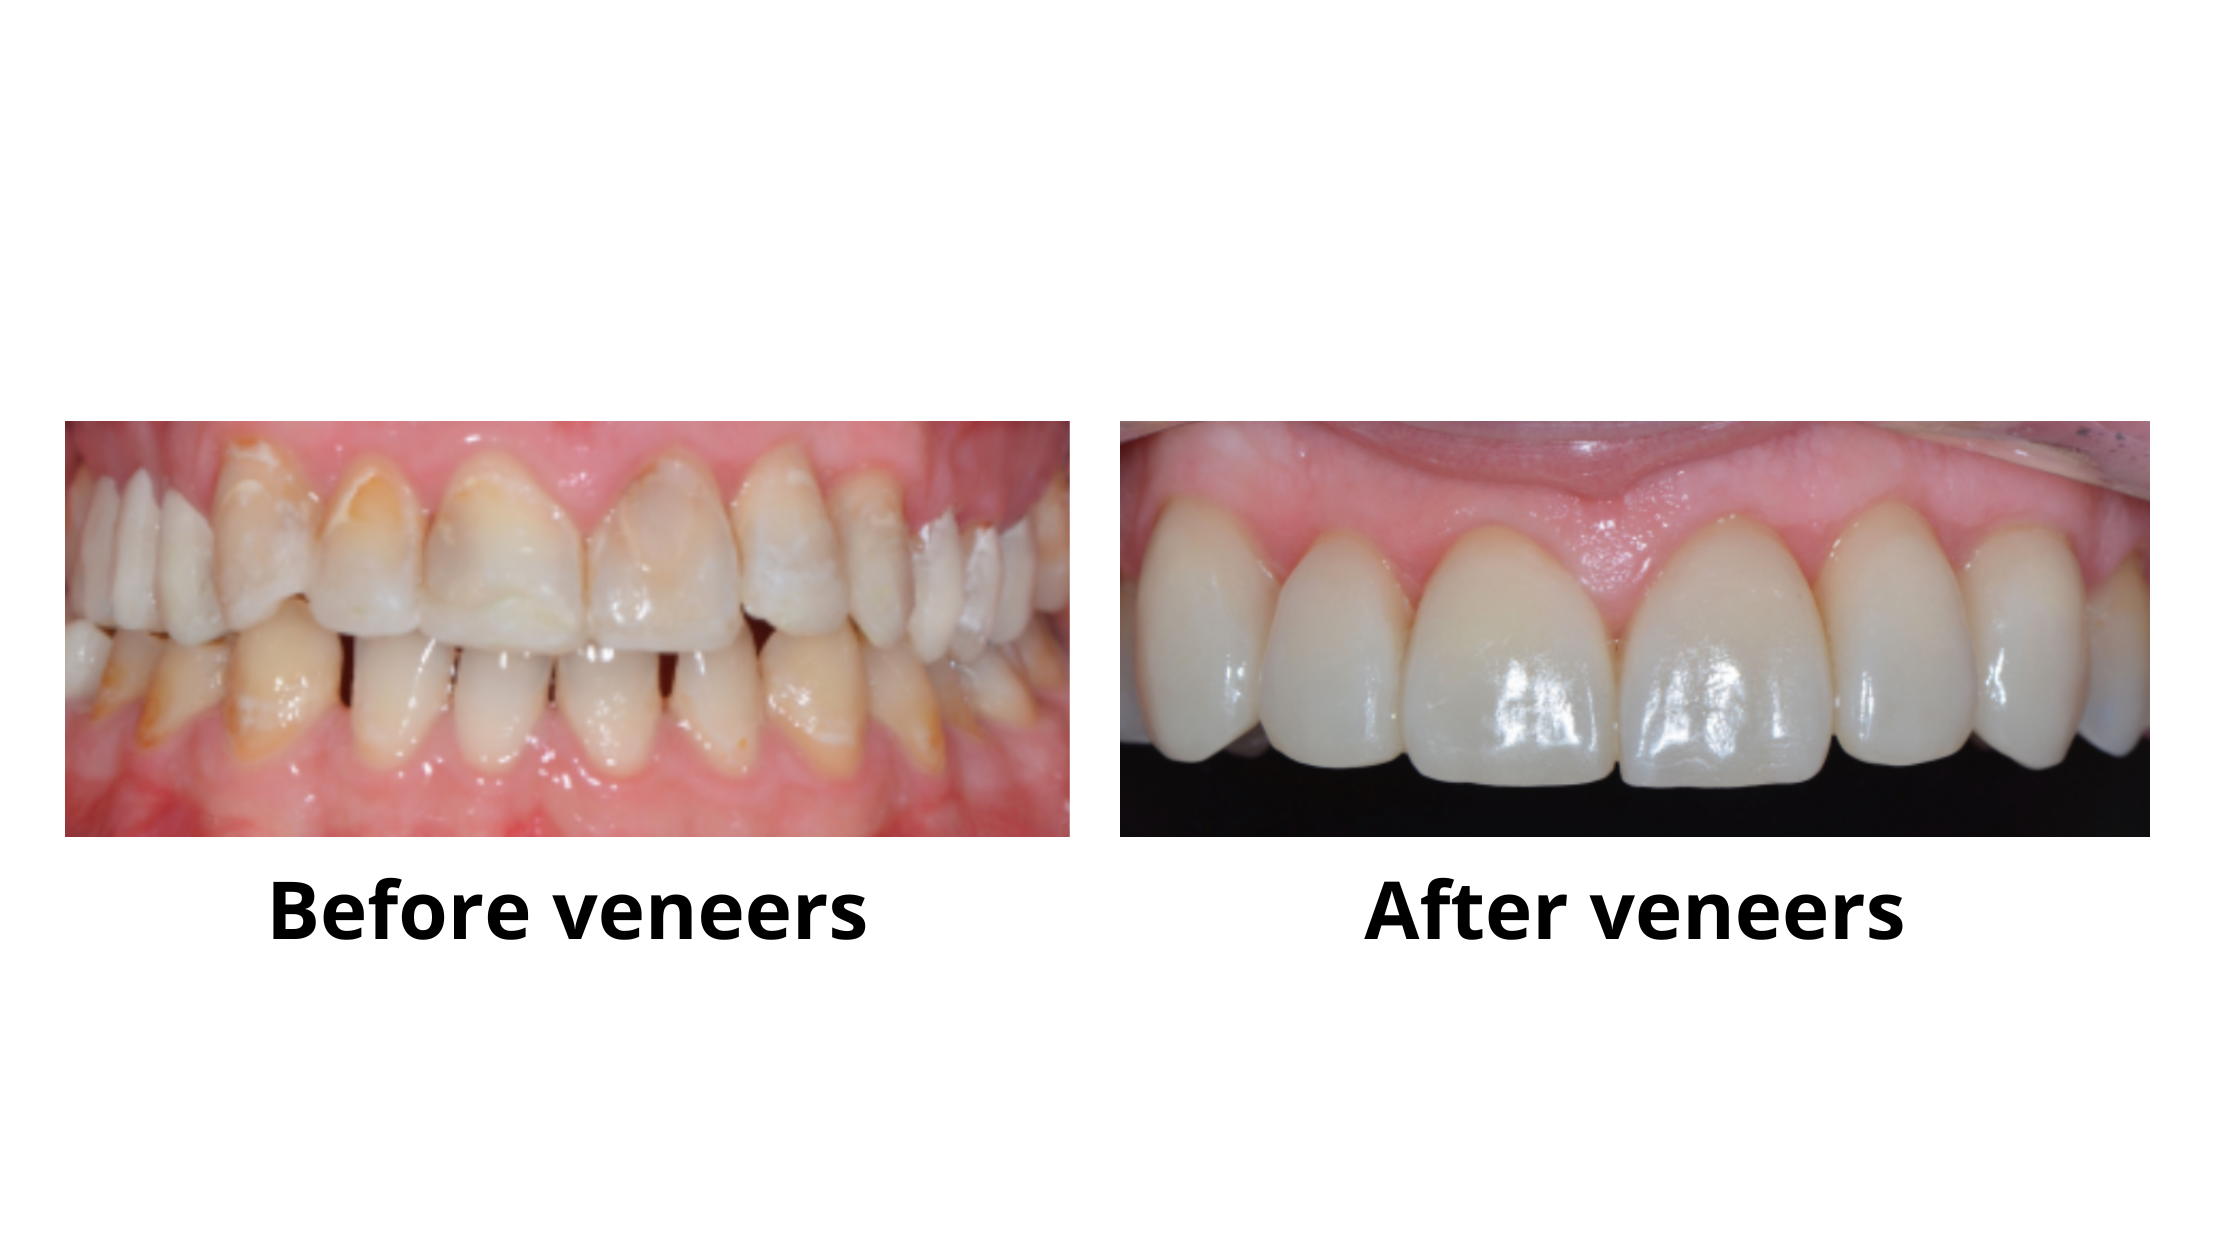 veneers for worn down front teeth before and after: Restoring the front surface of teeth